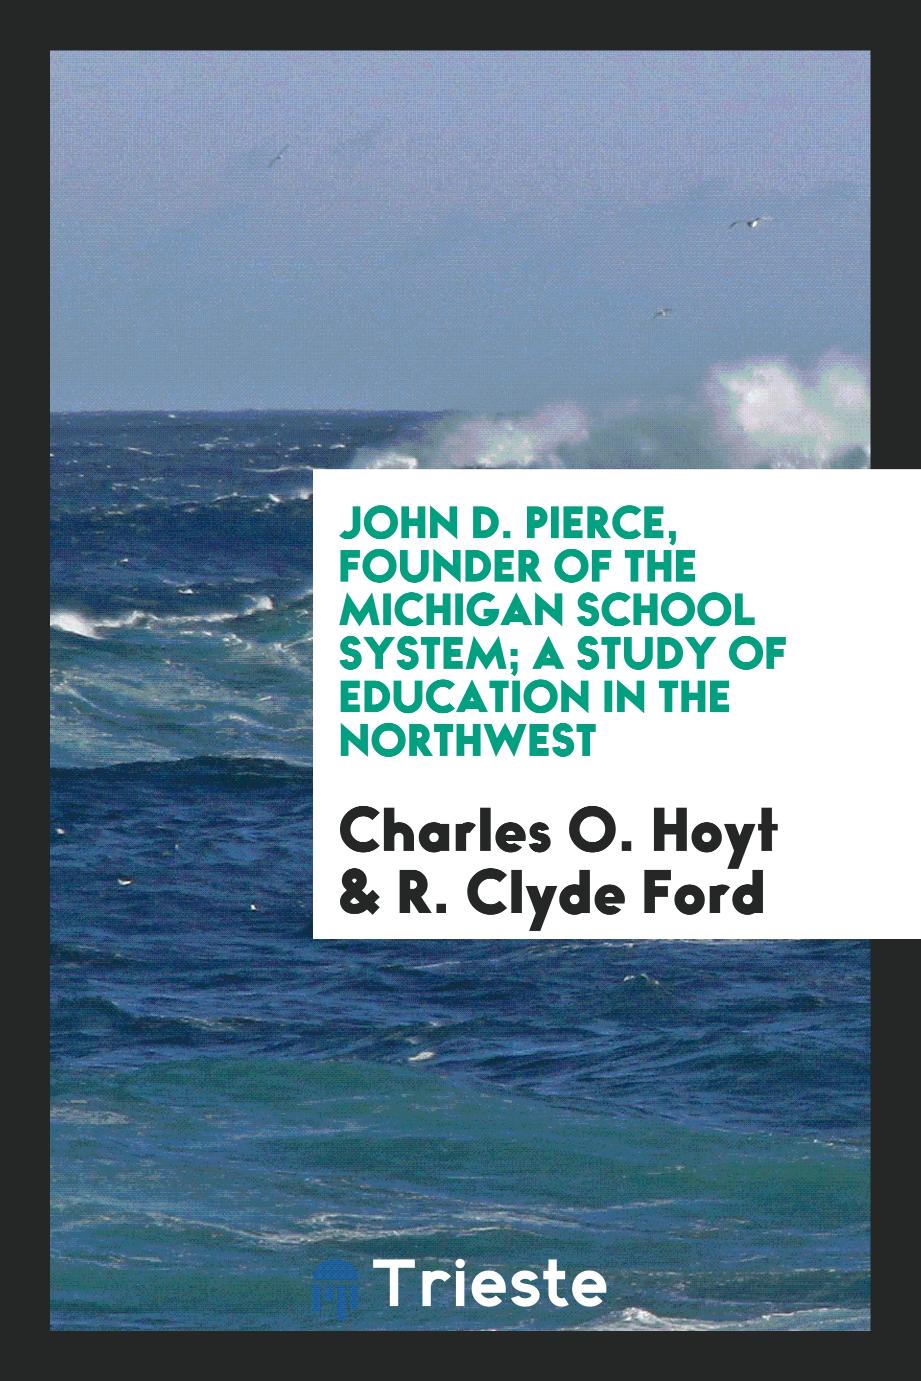 John D. Pierce, founder of the Michigan school system; a study of education in the Northwest